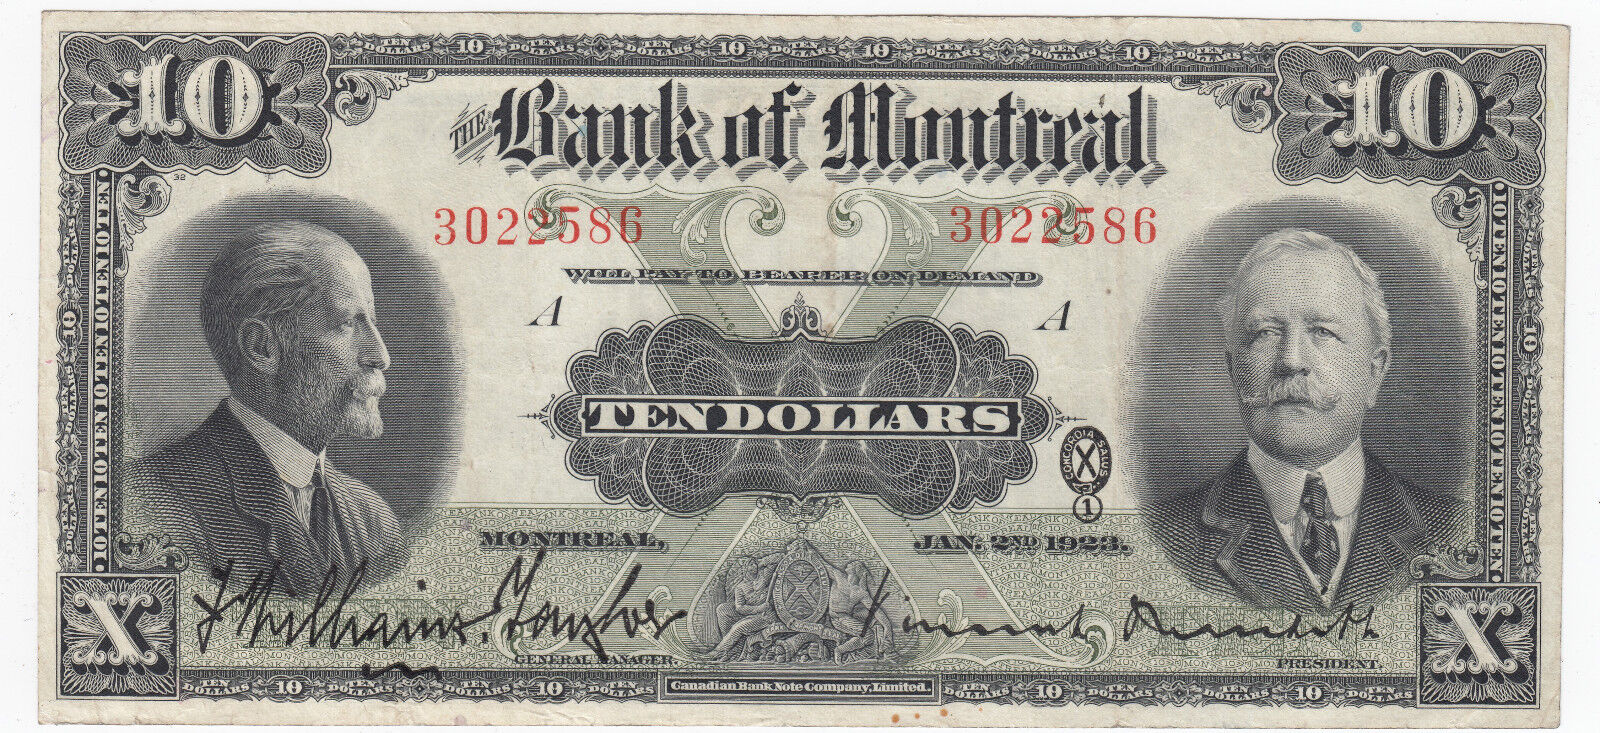 1923 Bank of Montreal $10 Chartered lowest price S 3022586 - N: A Popular Banknote